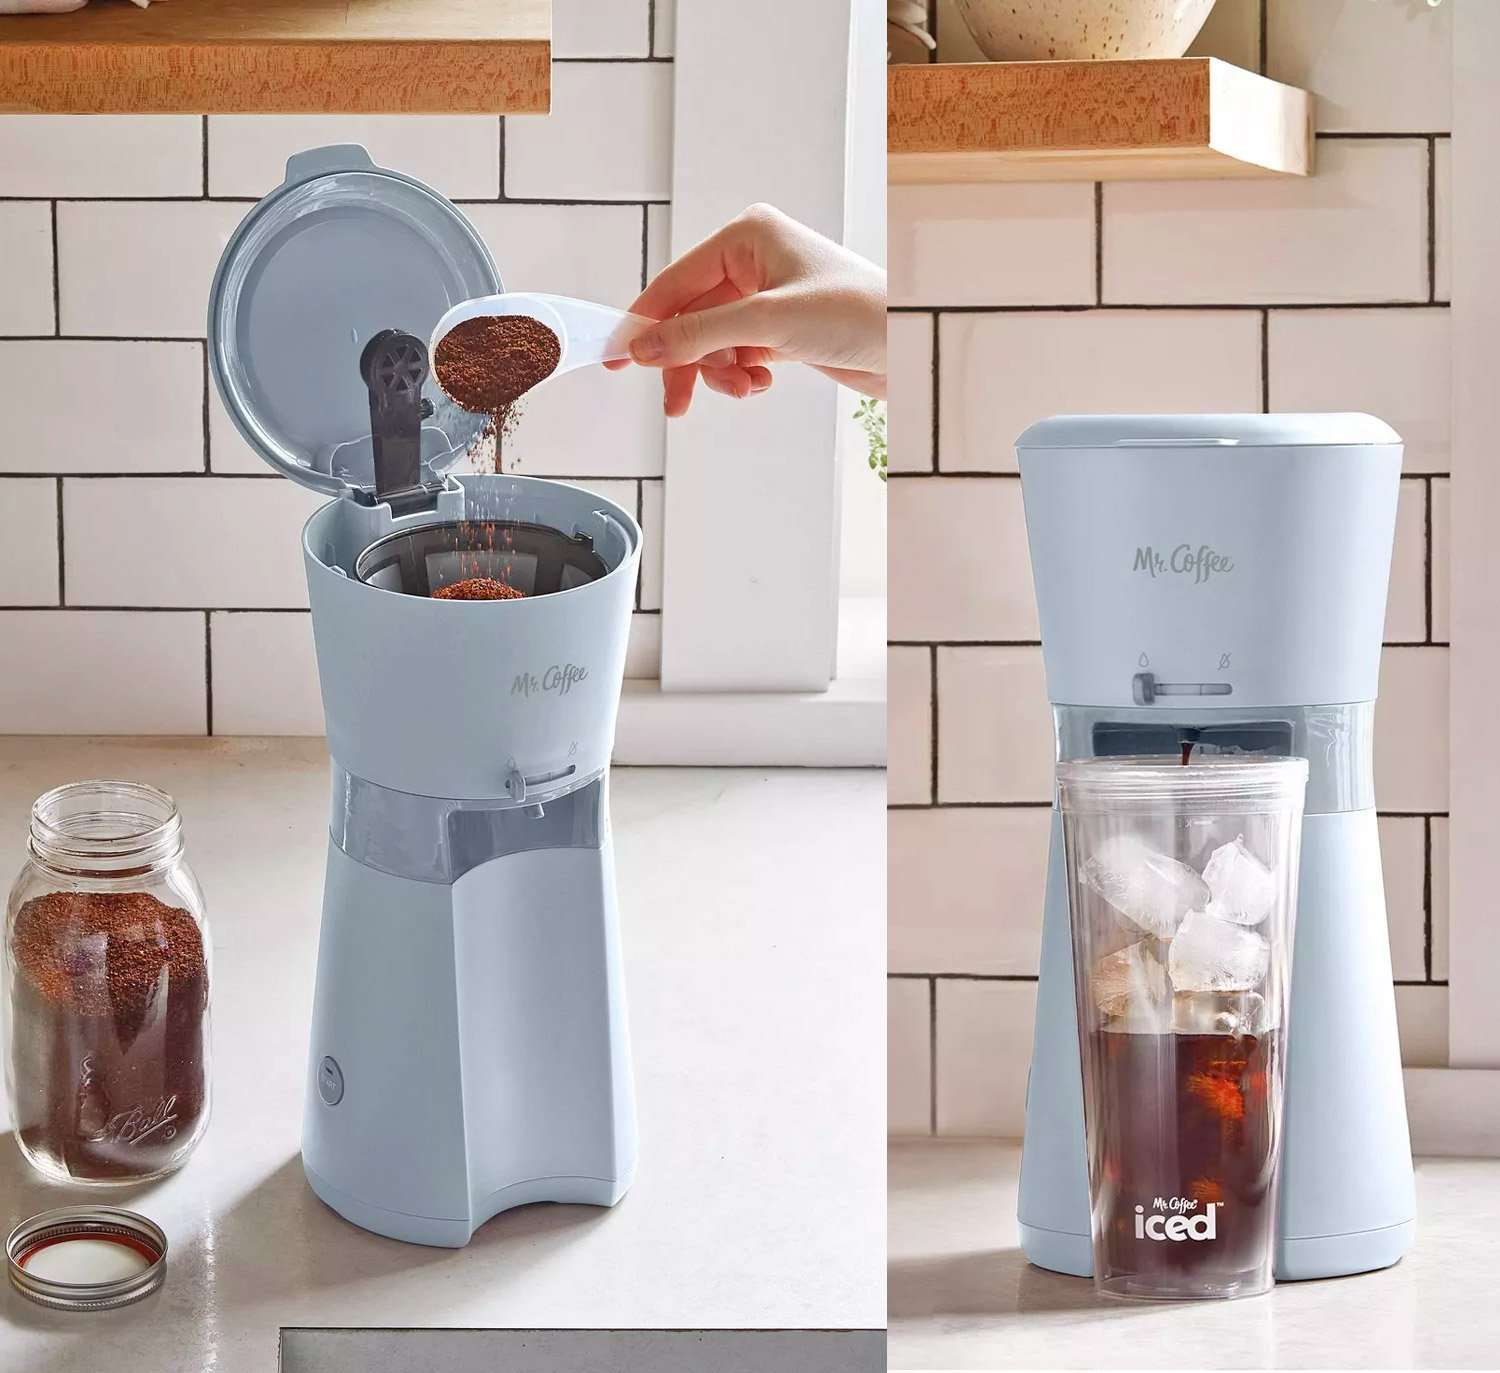 This New Iced Coffee Maker By Mr. Coffee Lets You Make ...